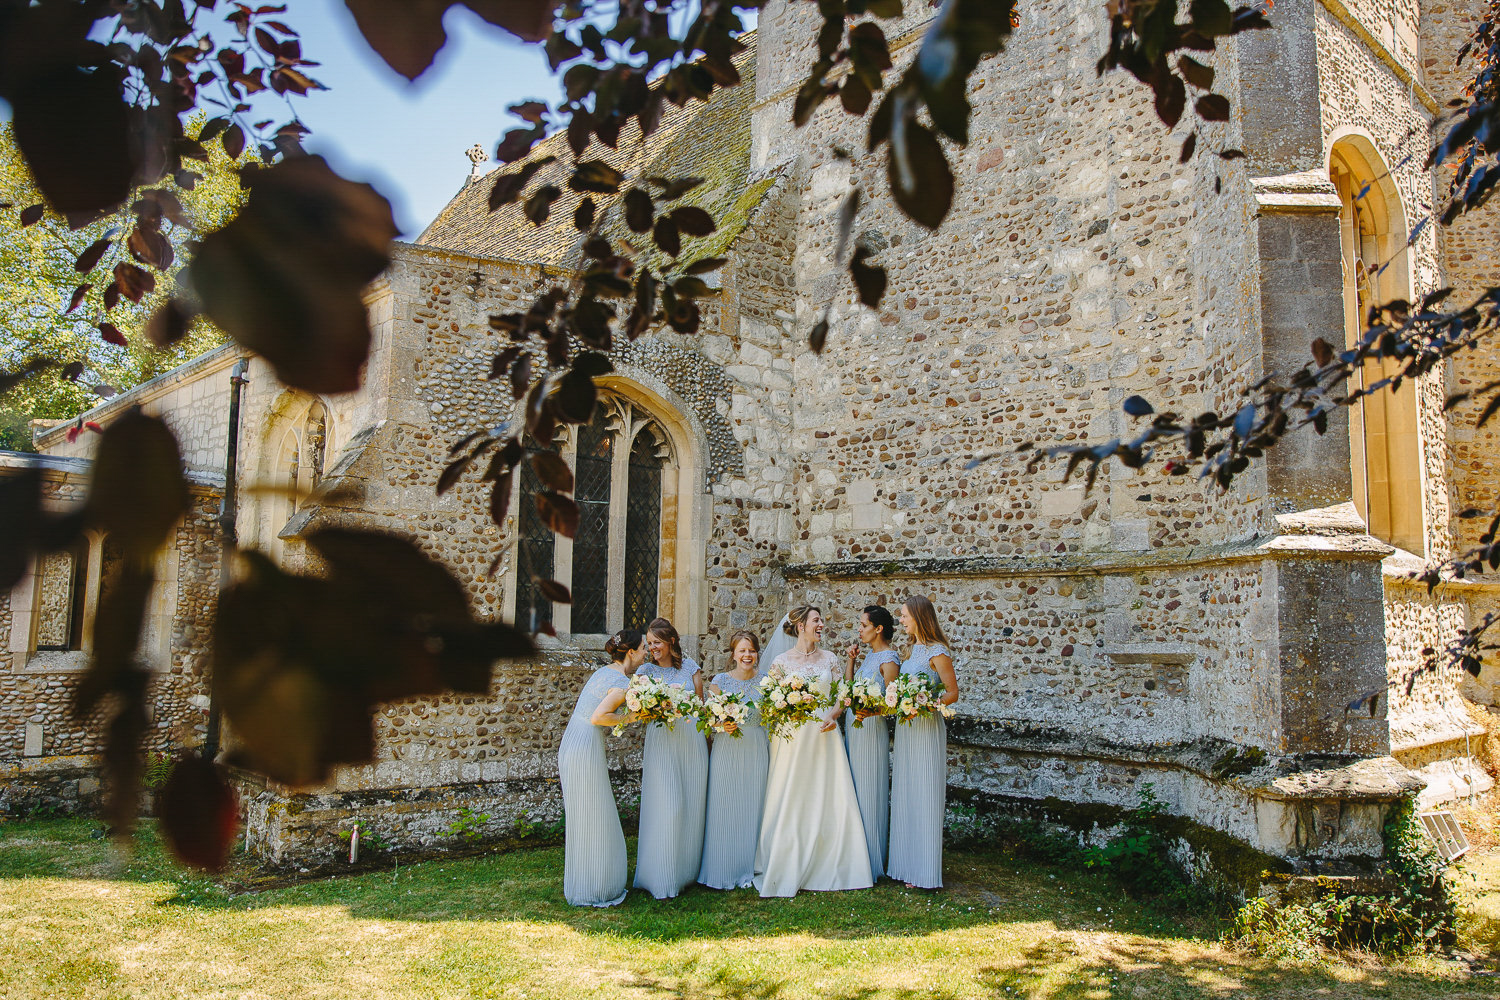 Bride and bridesmaids outside a church